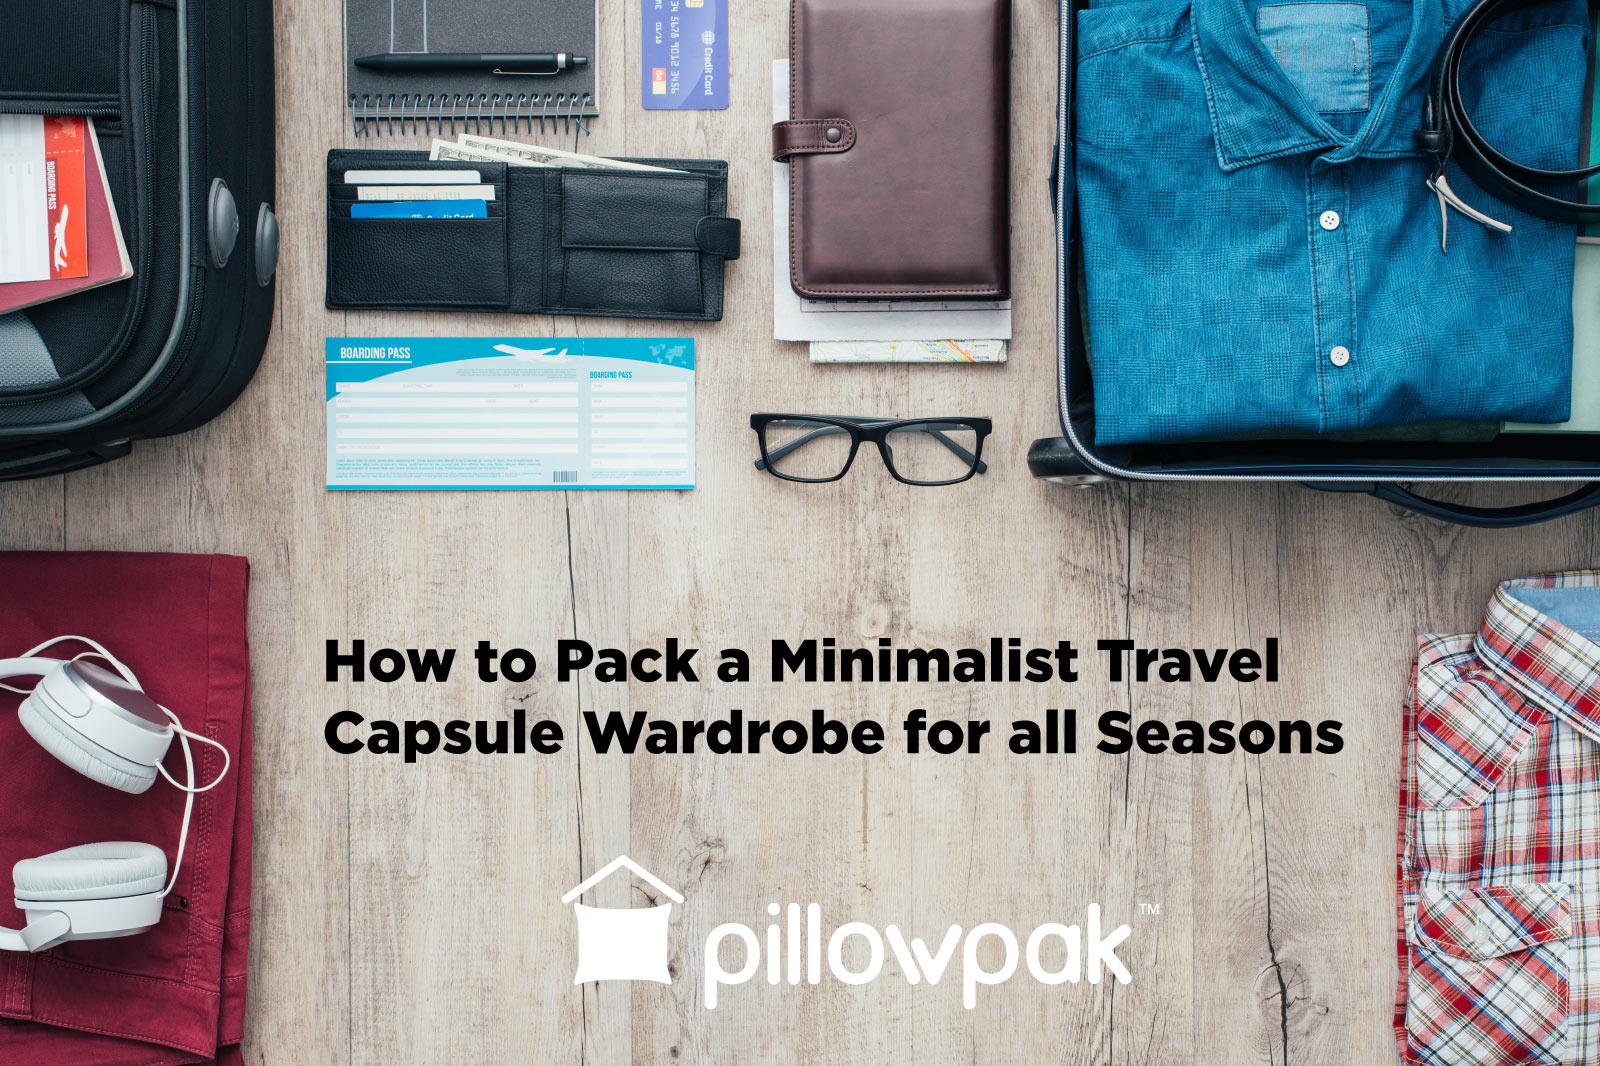 How to Pack a Minimalist Travel Capsule Wardrobe for all Seasons